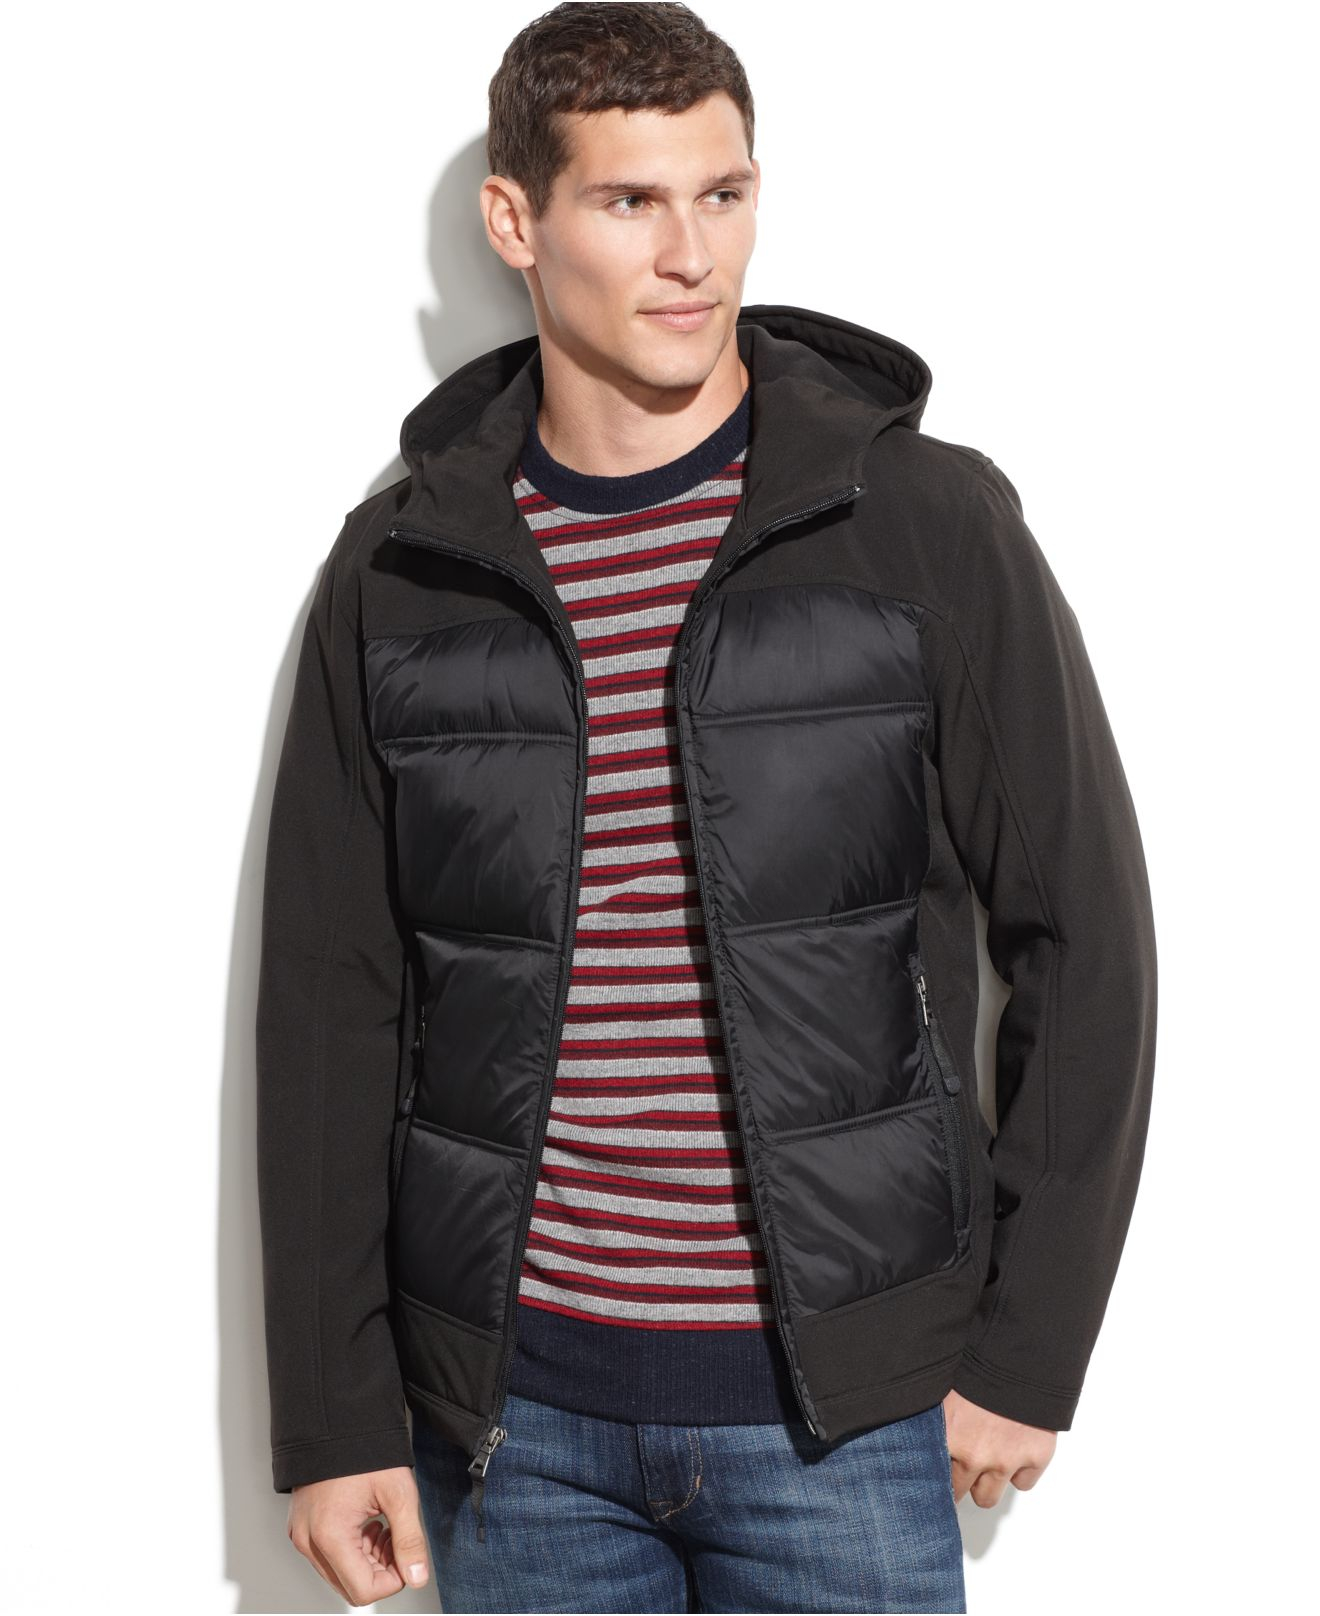 Lyst - Guess Hooded Quilted Soft-shell Jacket in Black for Men